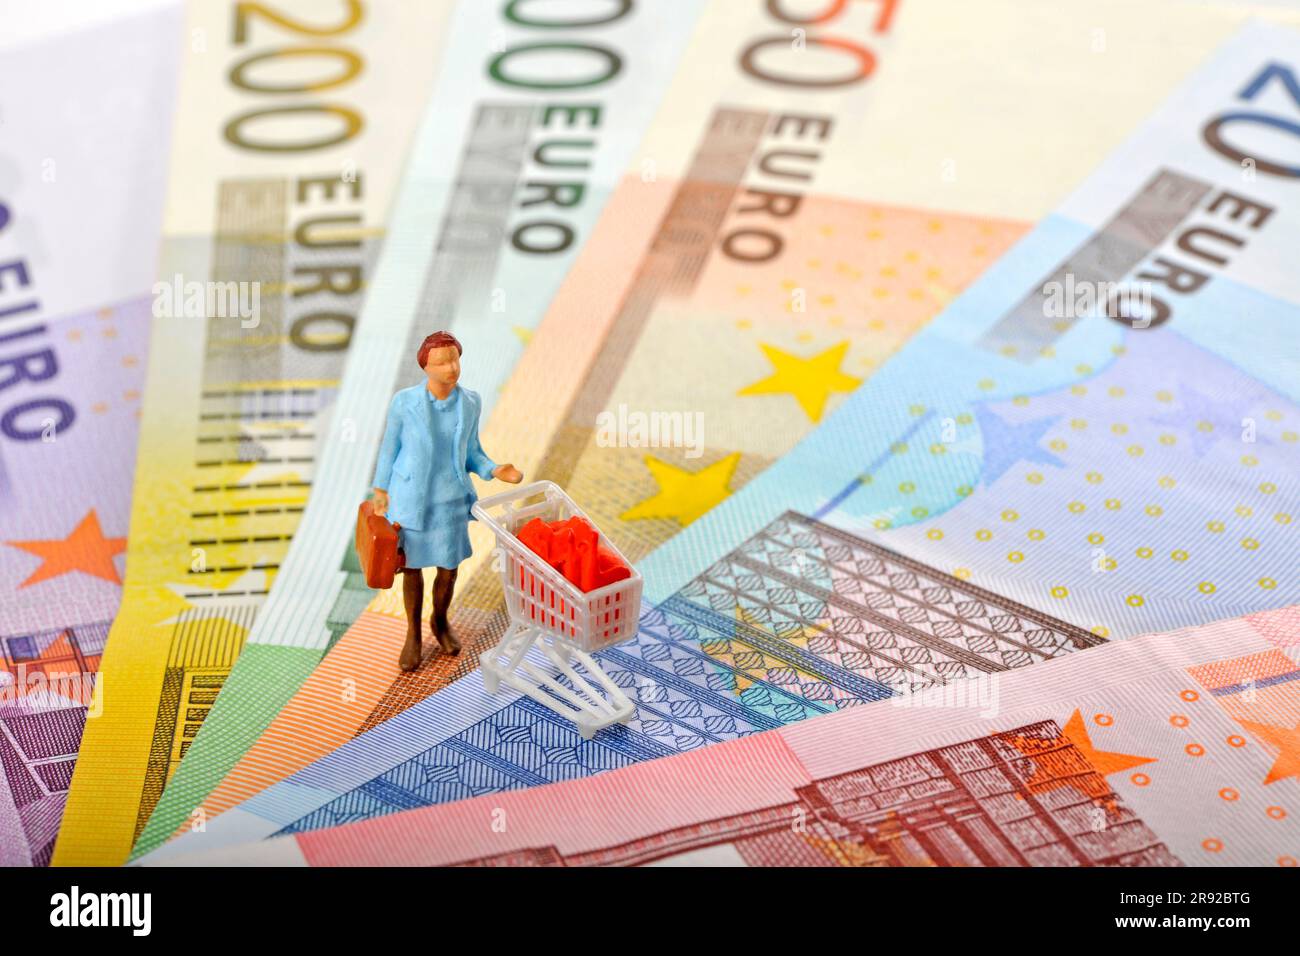 female retiree figurine with a full shopping cart on euro banknotes Stock Photo